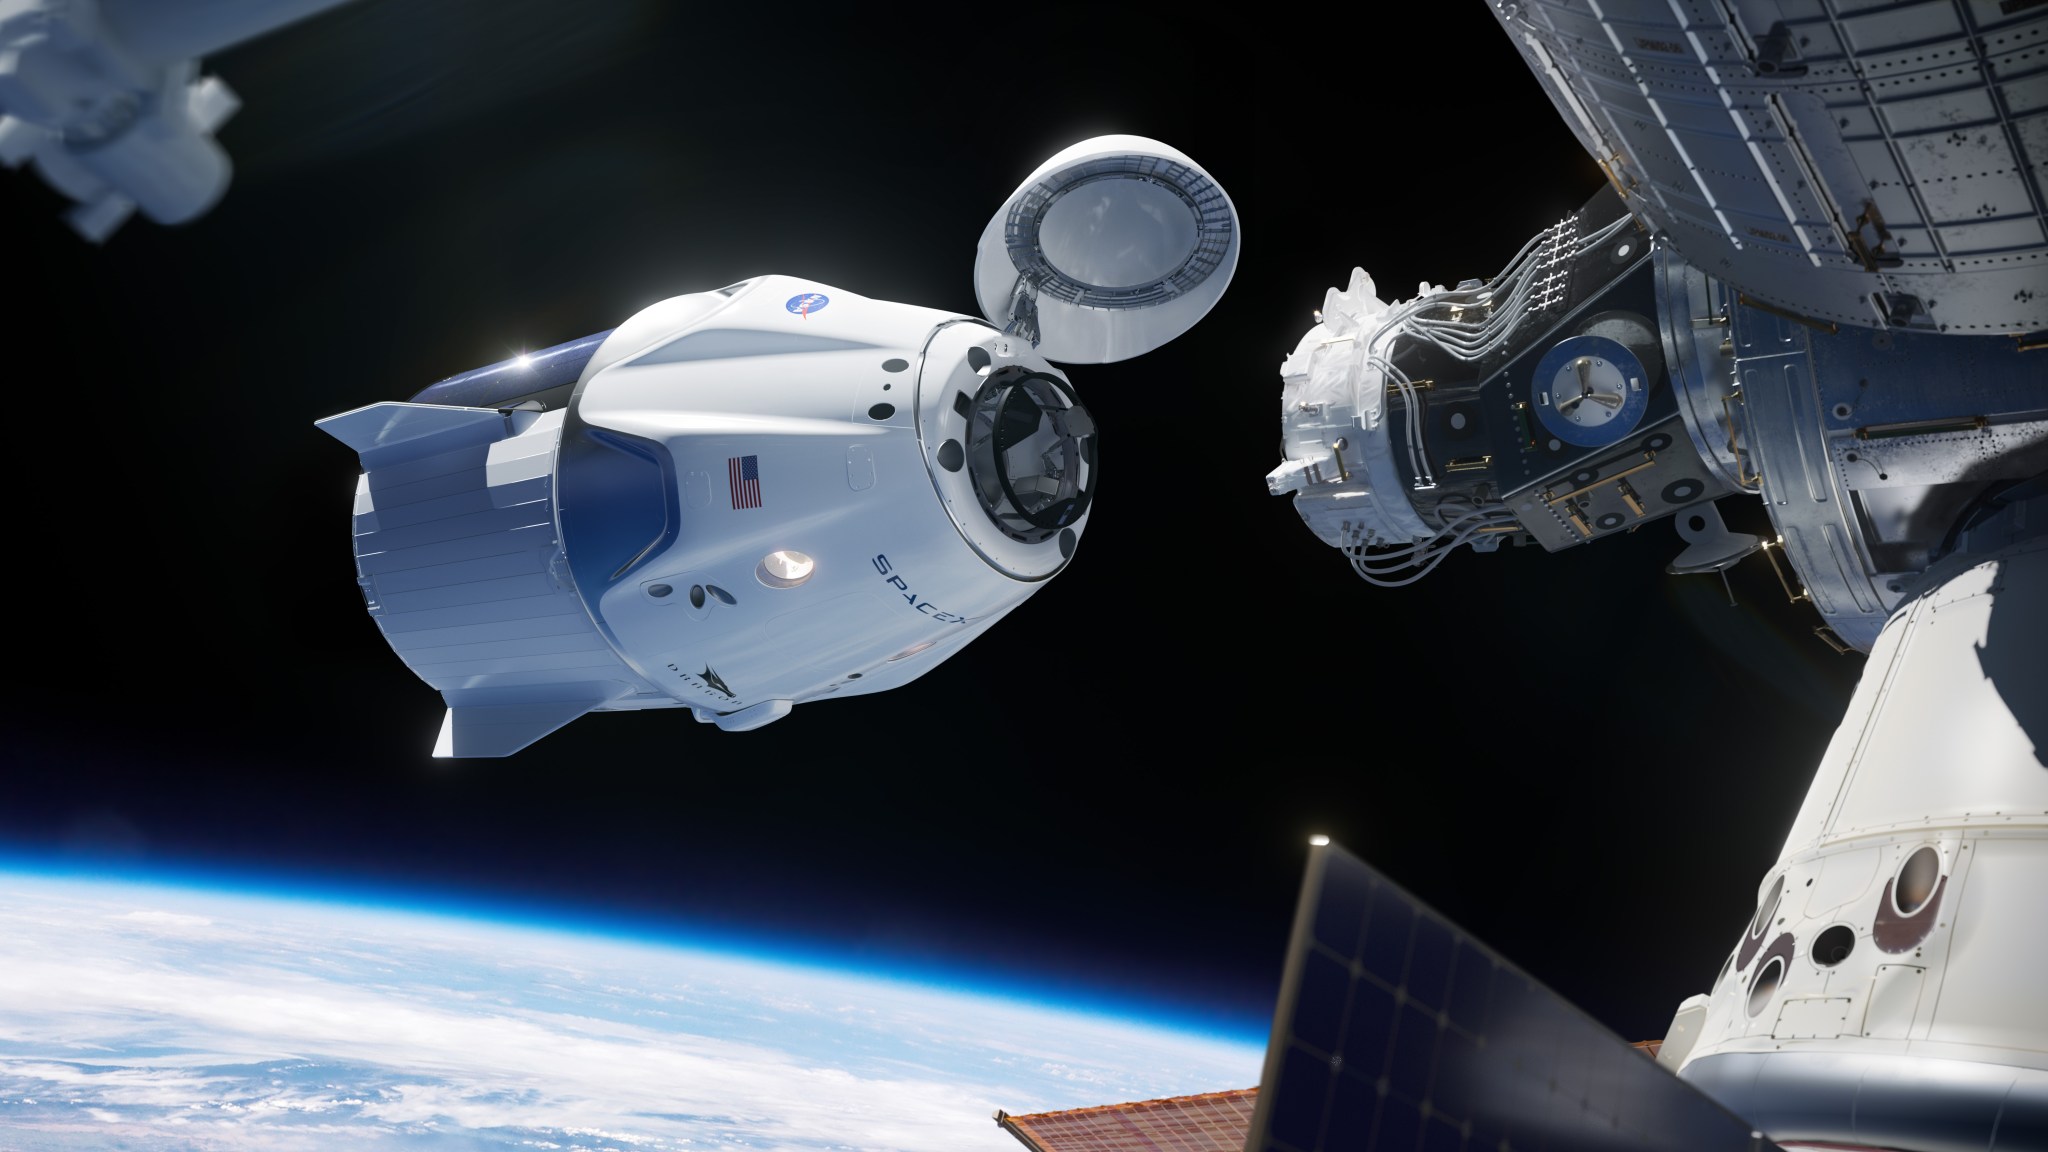 Illustration of the SpaceX Dragon crew spacecraft.